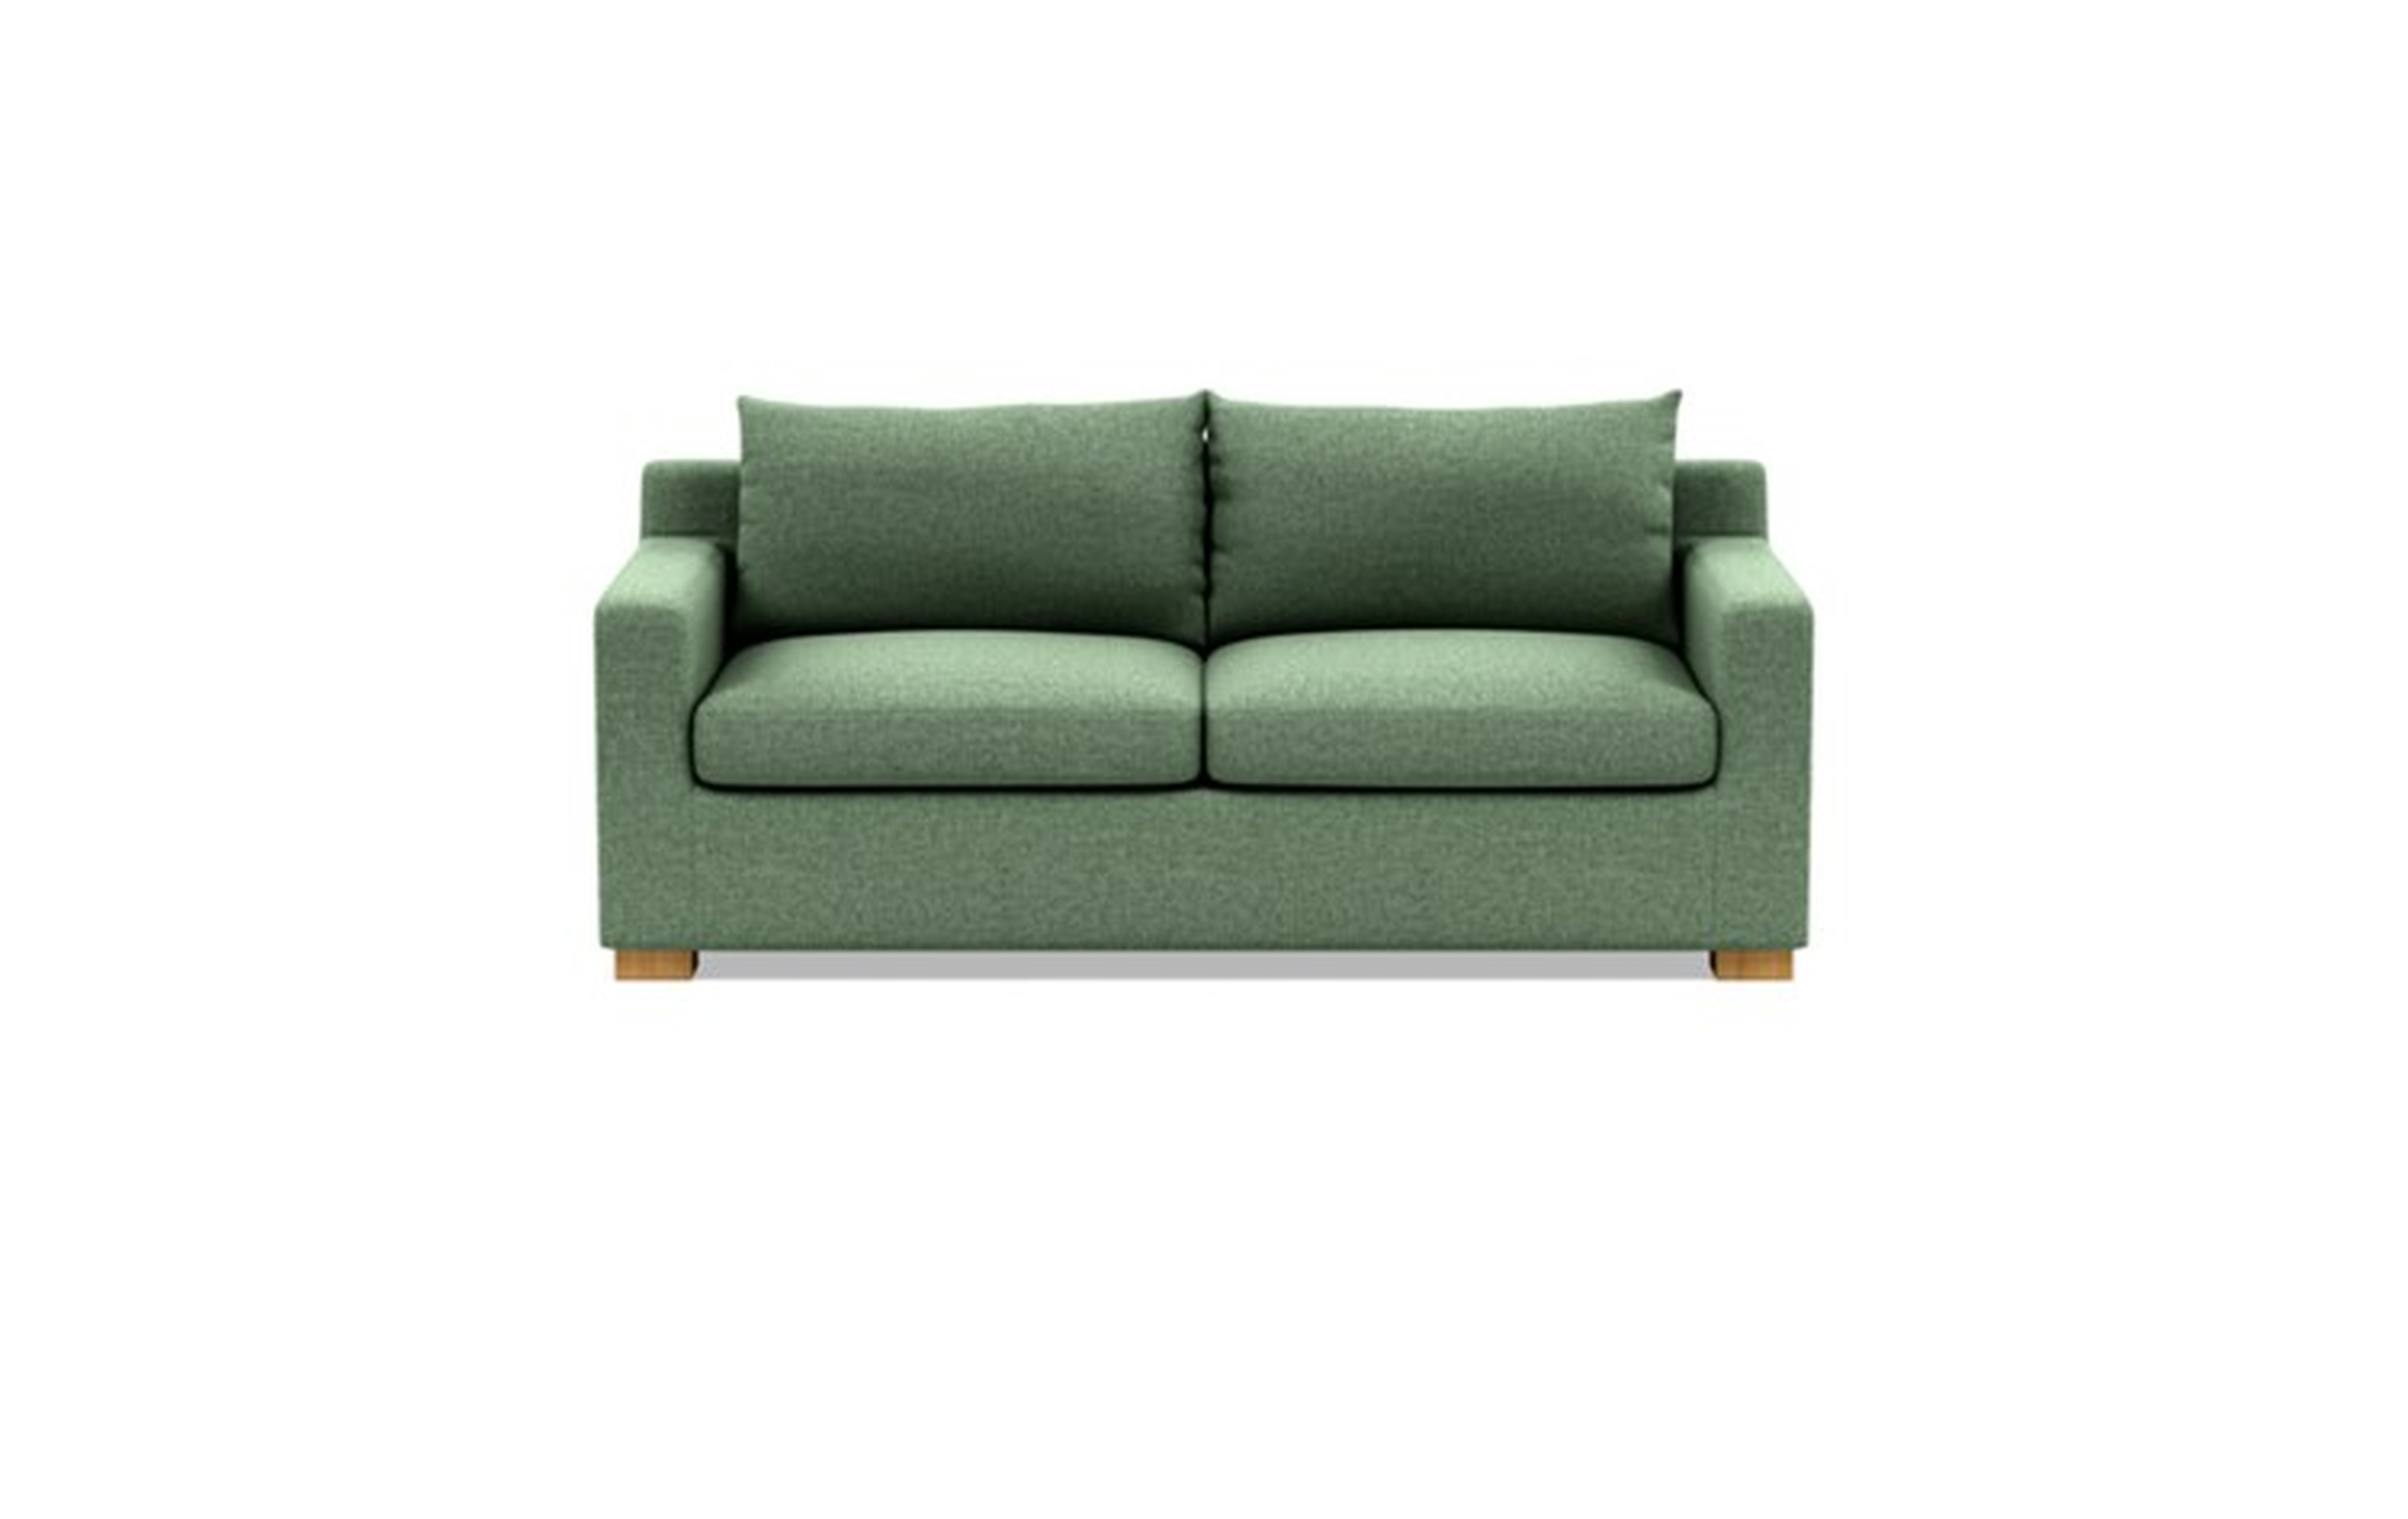 Sloan Sleeper Sleeper Sofa with Green Forest Fabric, double down blend cushions, and Natural Oak legs - Interior Define